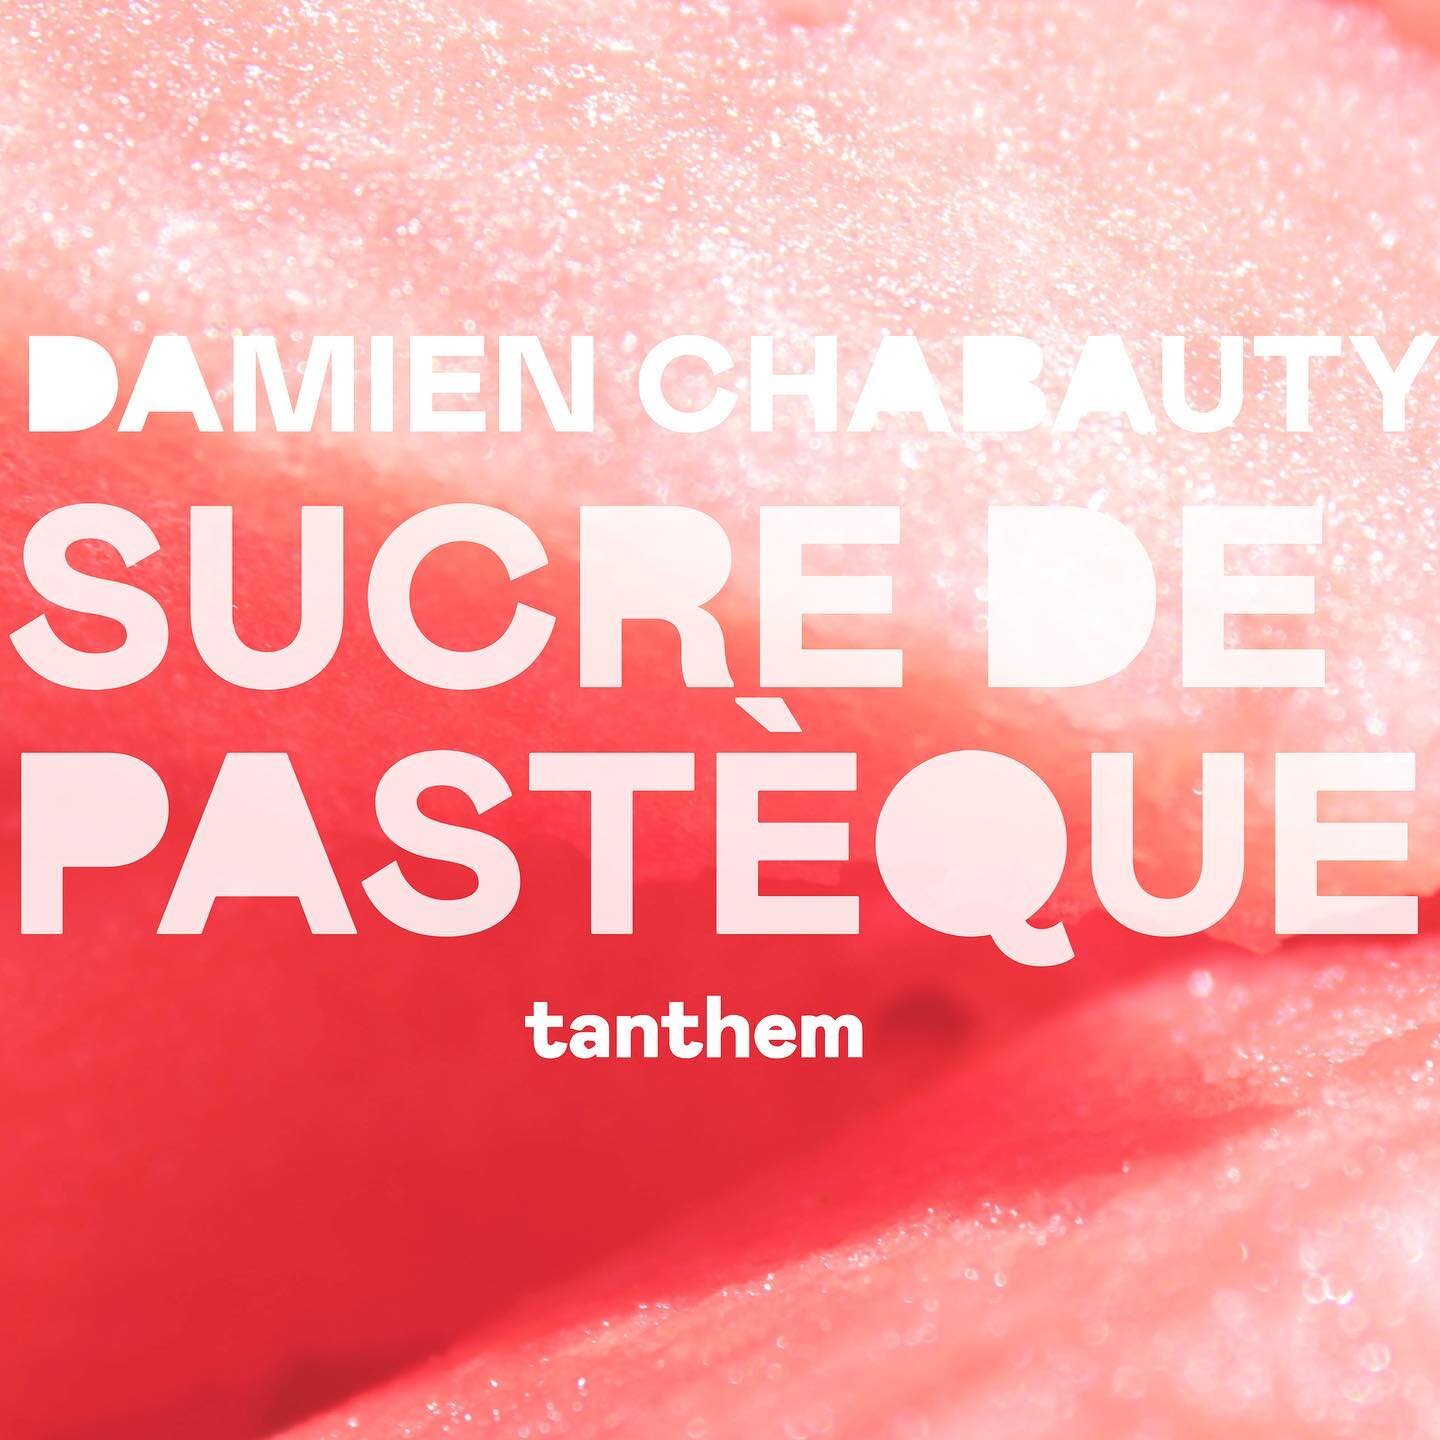 Sucre de Past&egrave;que is colourful experience in summer with a playful twist. It is a moment to relax and enjoy the present.

Tanthem present a solo show by @damienchabauty at 4004 Saint Denis. Link in the bio.